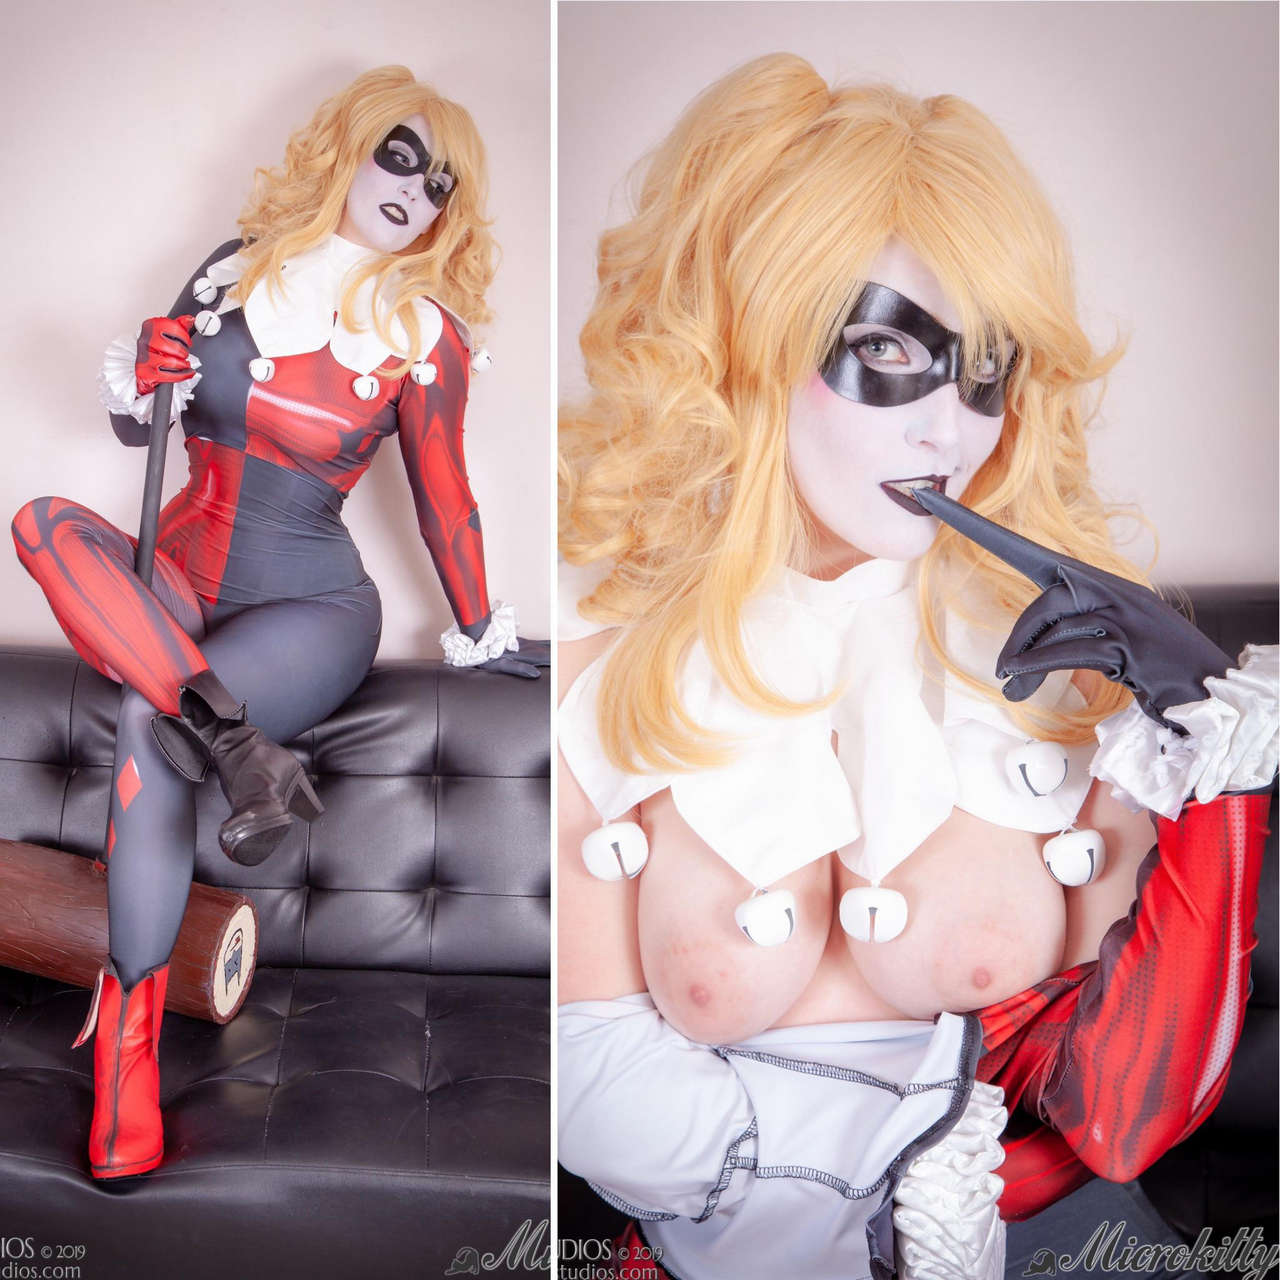 Self Post Microkitty As Harley Quin